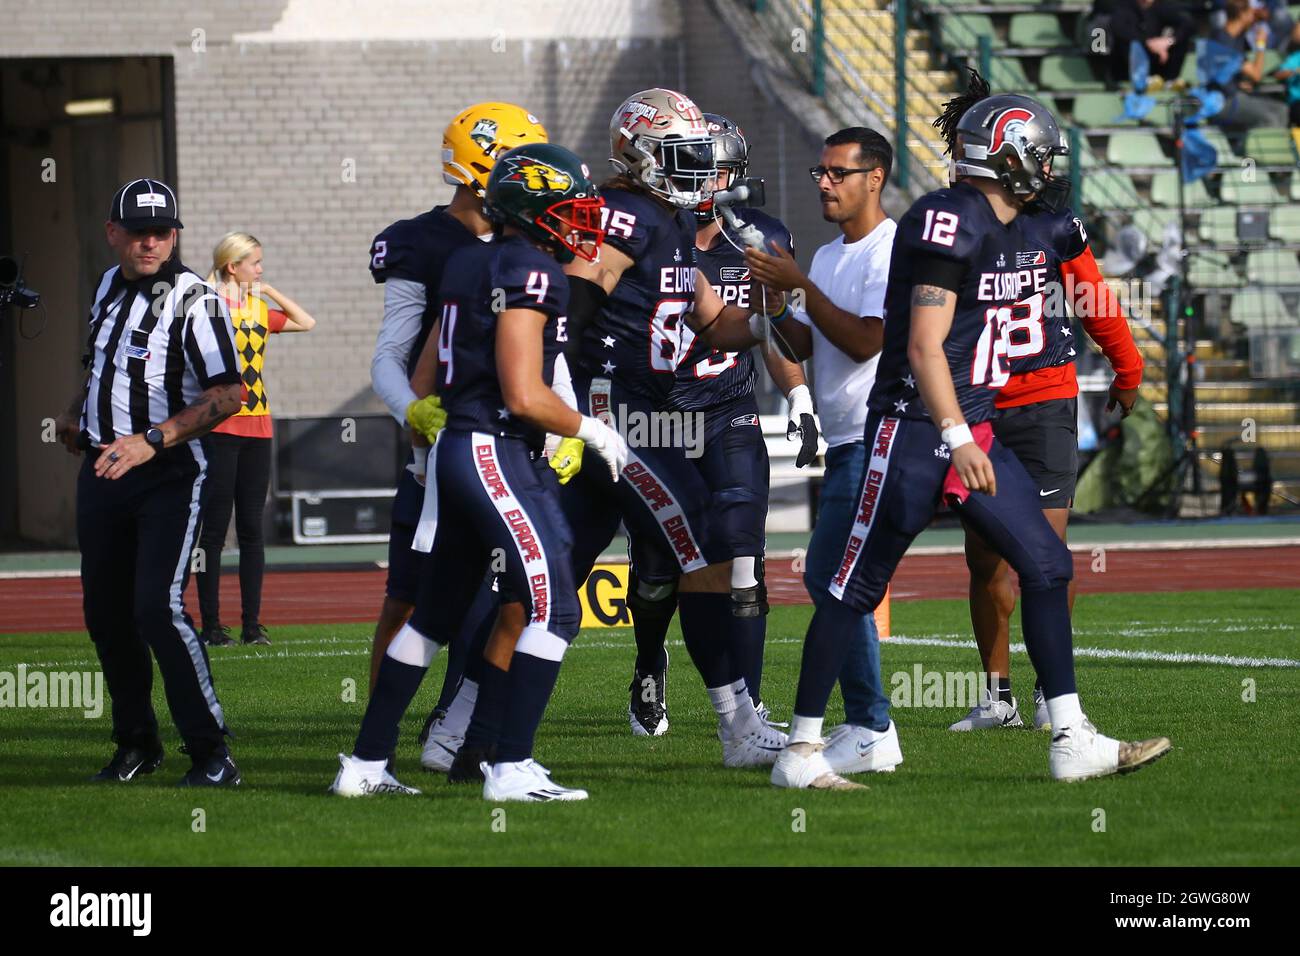 03 October 2021, Berlin: American Football: All Star Game, European League  of Football - Team USA: Jamaal White (Team USA, M) and William Loayd (Team  USA, r) try to stop Gerald Ameln (